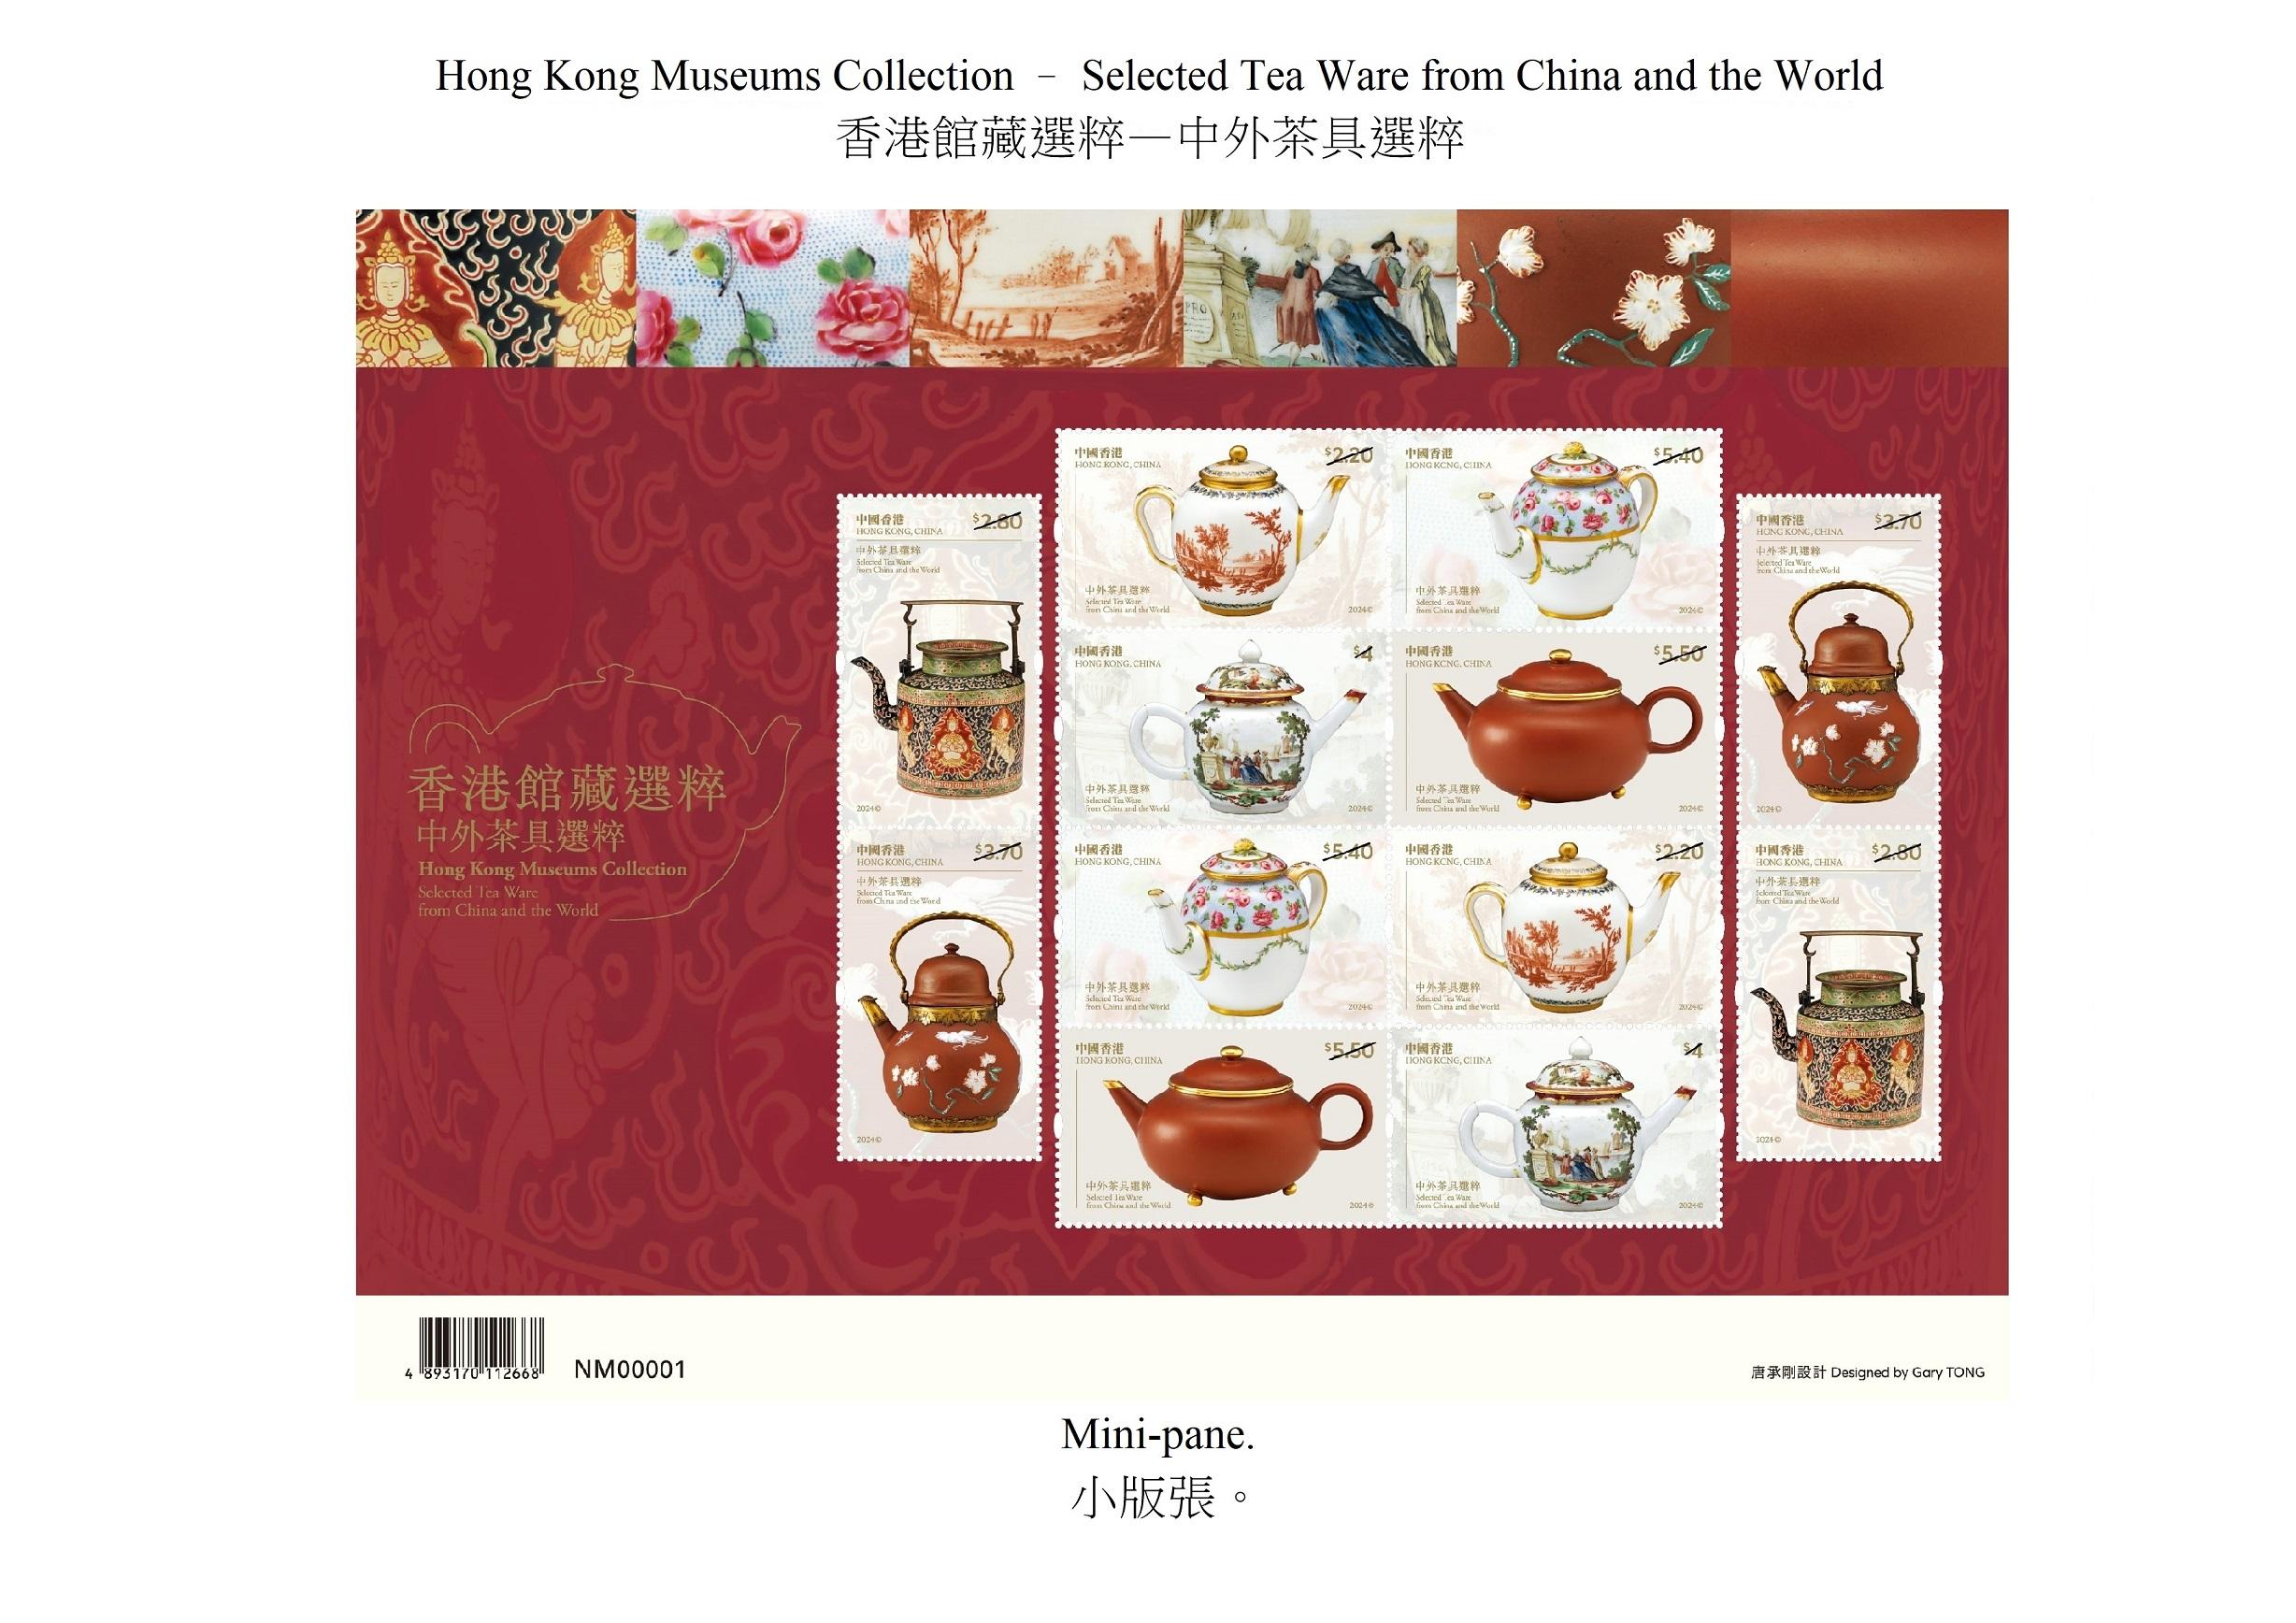 Hongkong Post will launch a special stamp issue and associated philatelic products on the theme of "Hong Kong Museums Collection - Selected Tea Ware from China and the World" on April 18 (Thursday). Photos shows the mini-pane.
